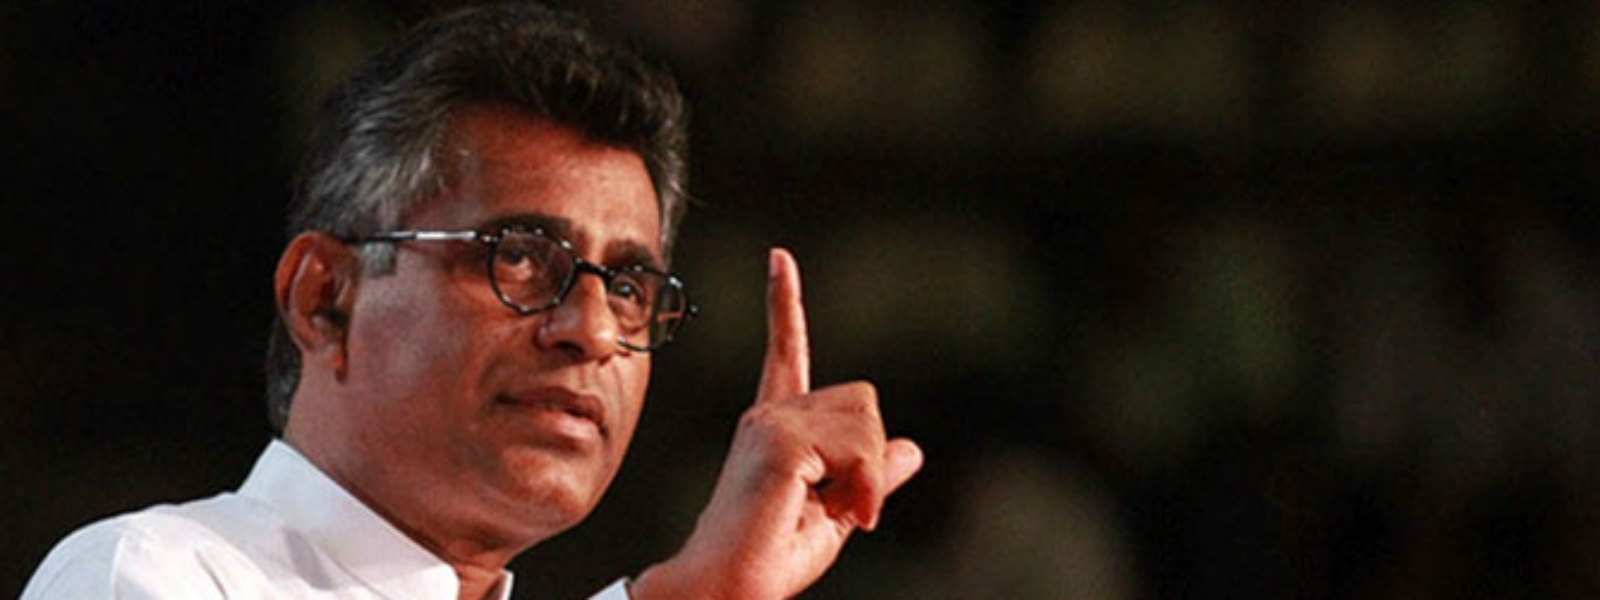 Patali Champika released on bail